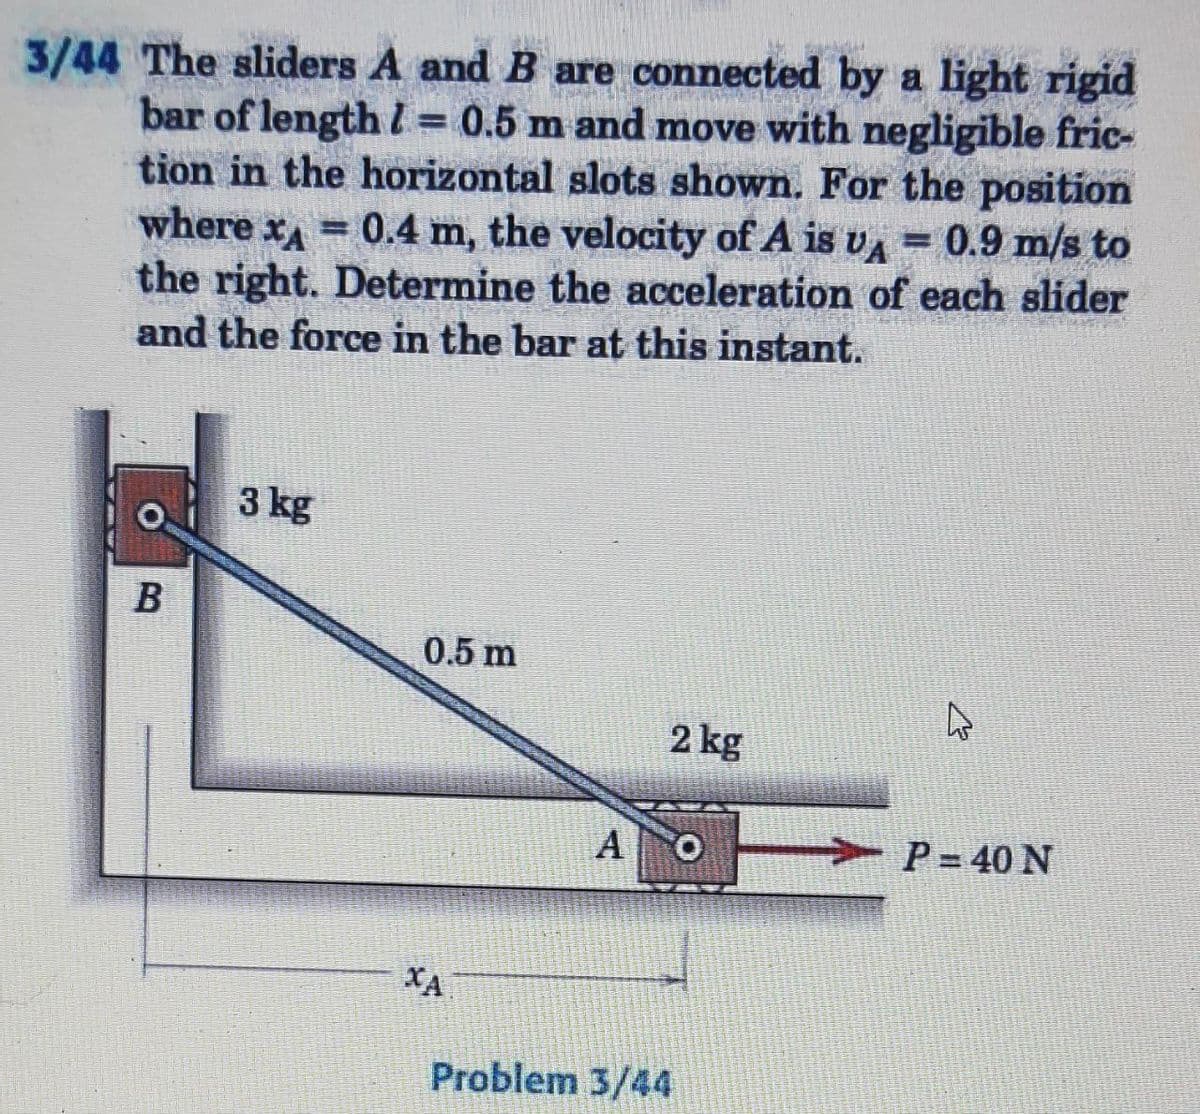 3/44 The sliders A and B are connected by a light rigid
bar of length = 0.5 m and move with negligible fric-
tion in the horizontal slots shown. For the position
where x = 0.4 m, the velocity of A is v= 0.9 m/s to
VA
the right. Determine the acceleration of each slider
and the force in the bar at this instant.
3 kg
0.5 m
2 kg
P=40 N
ΧΑ
B
Mape
A O
Problem 3/44